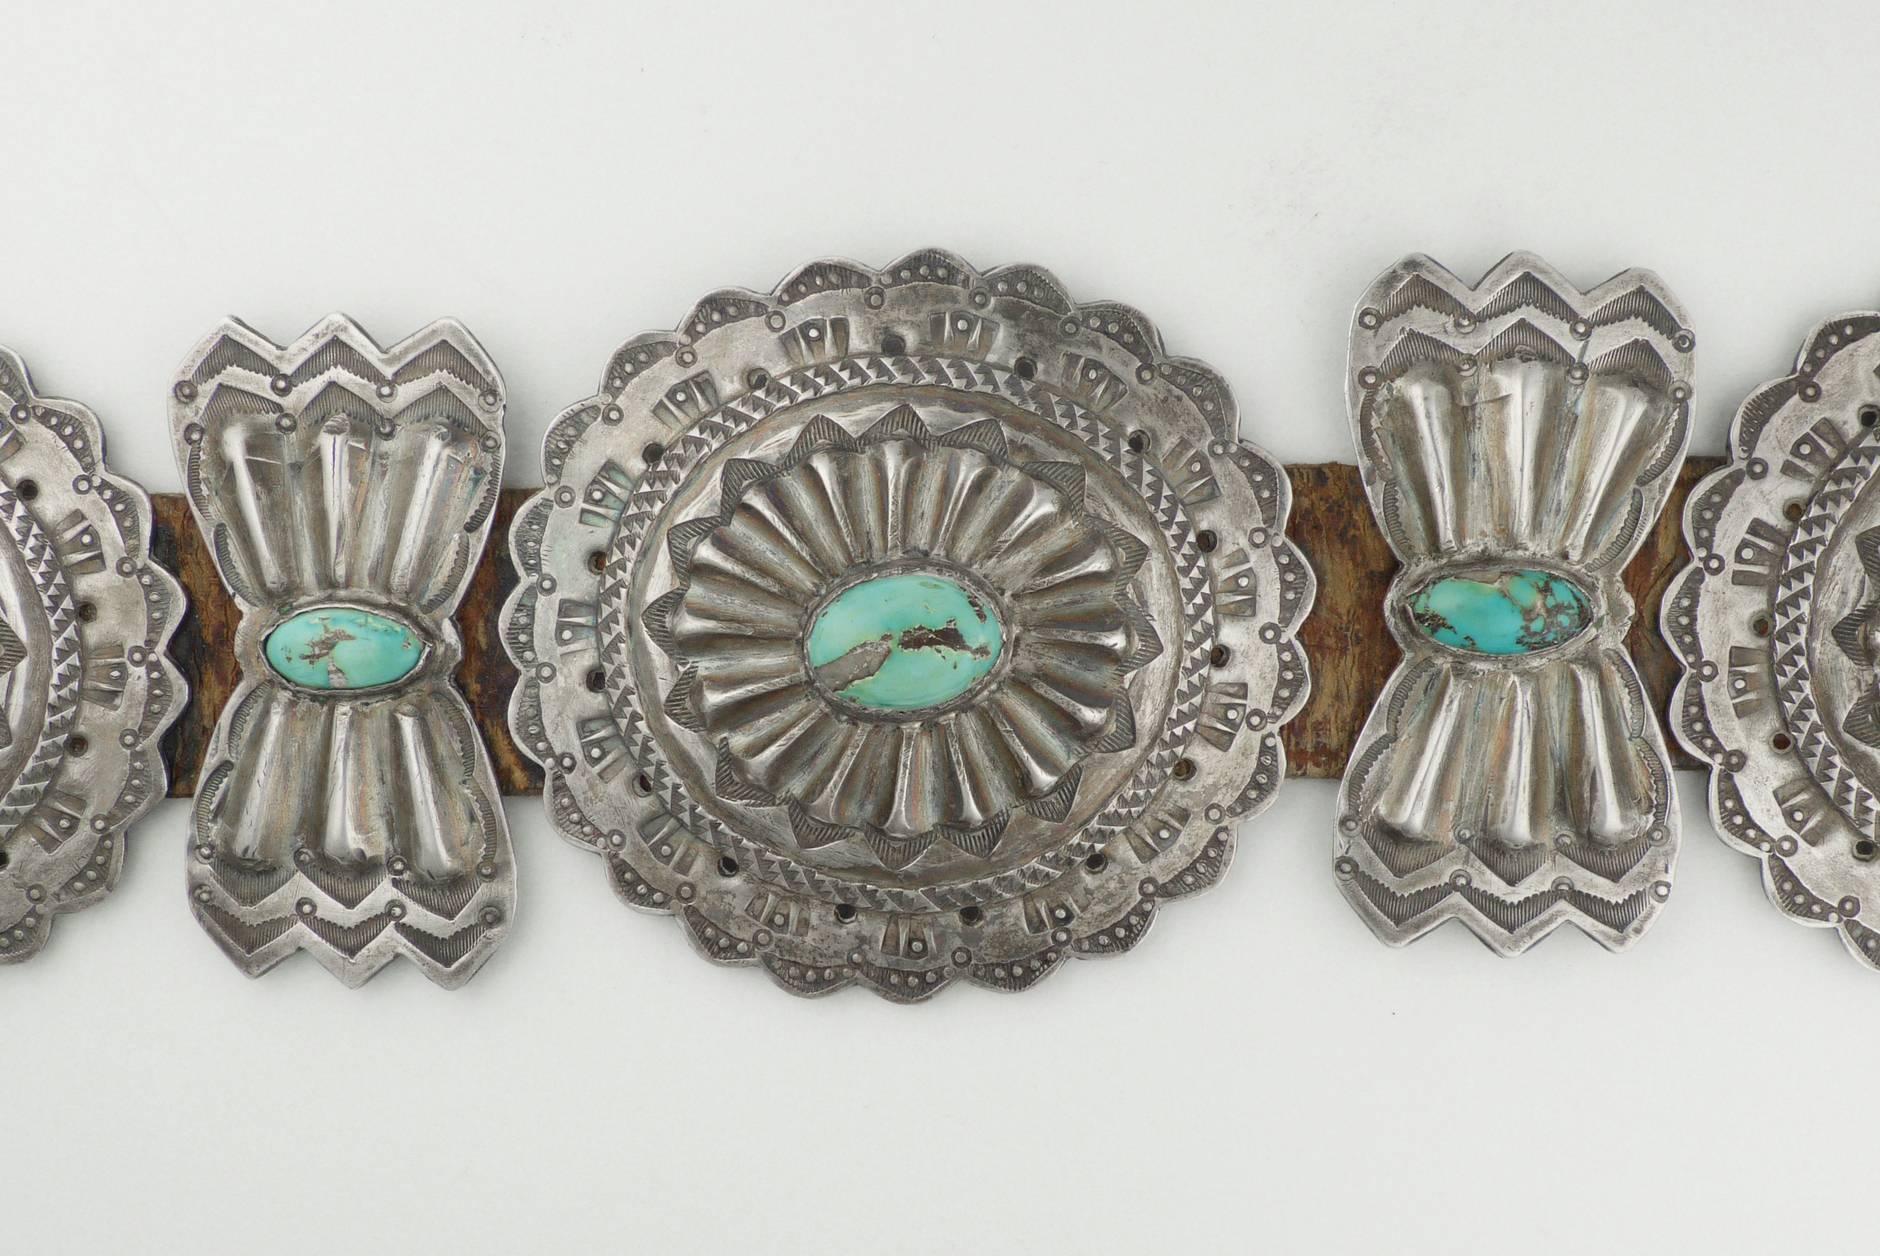 Navajo Stamped Silver Concho Belt with Turquoise, circa 1940